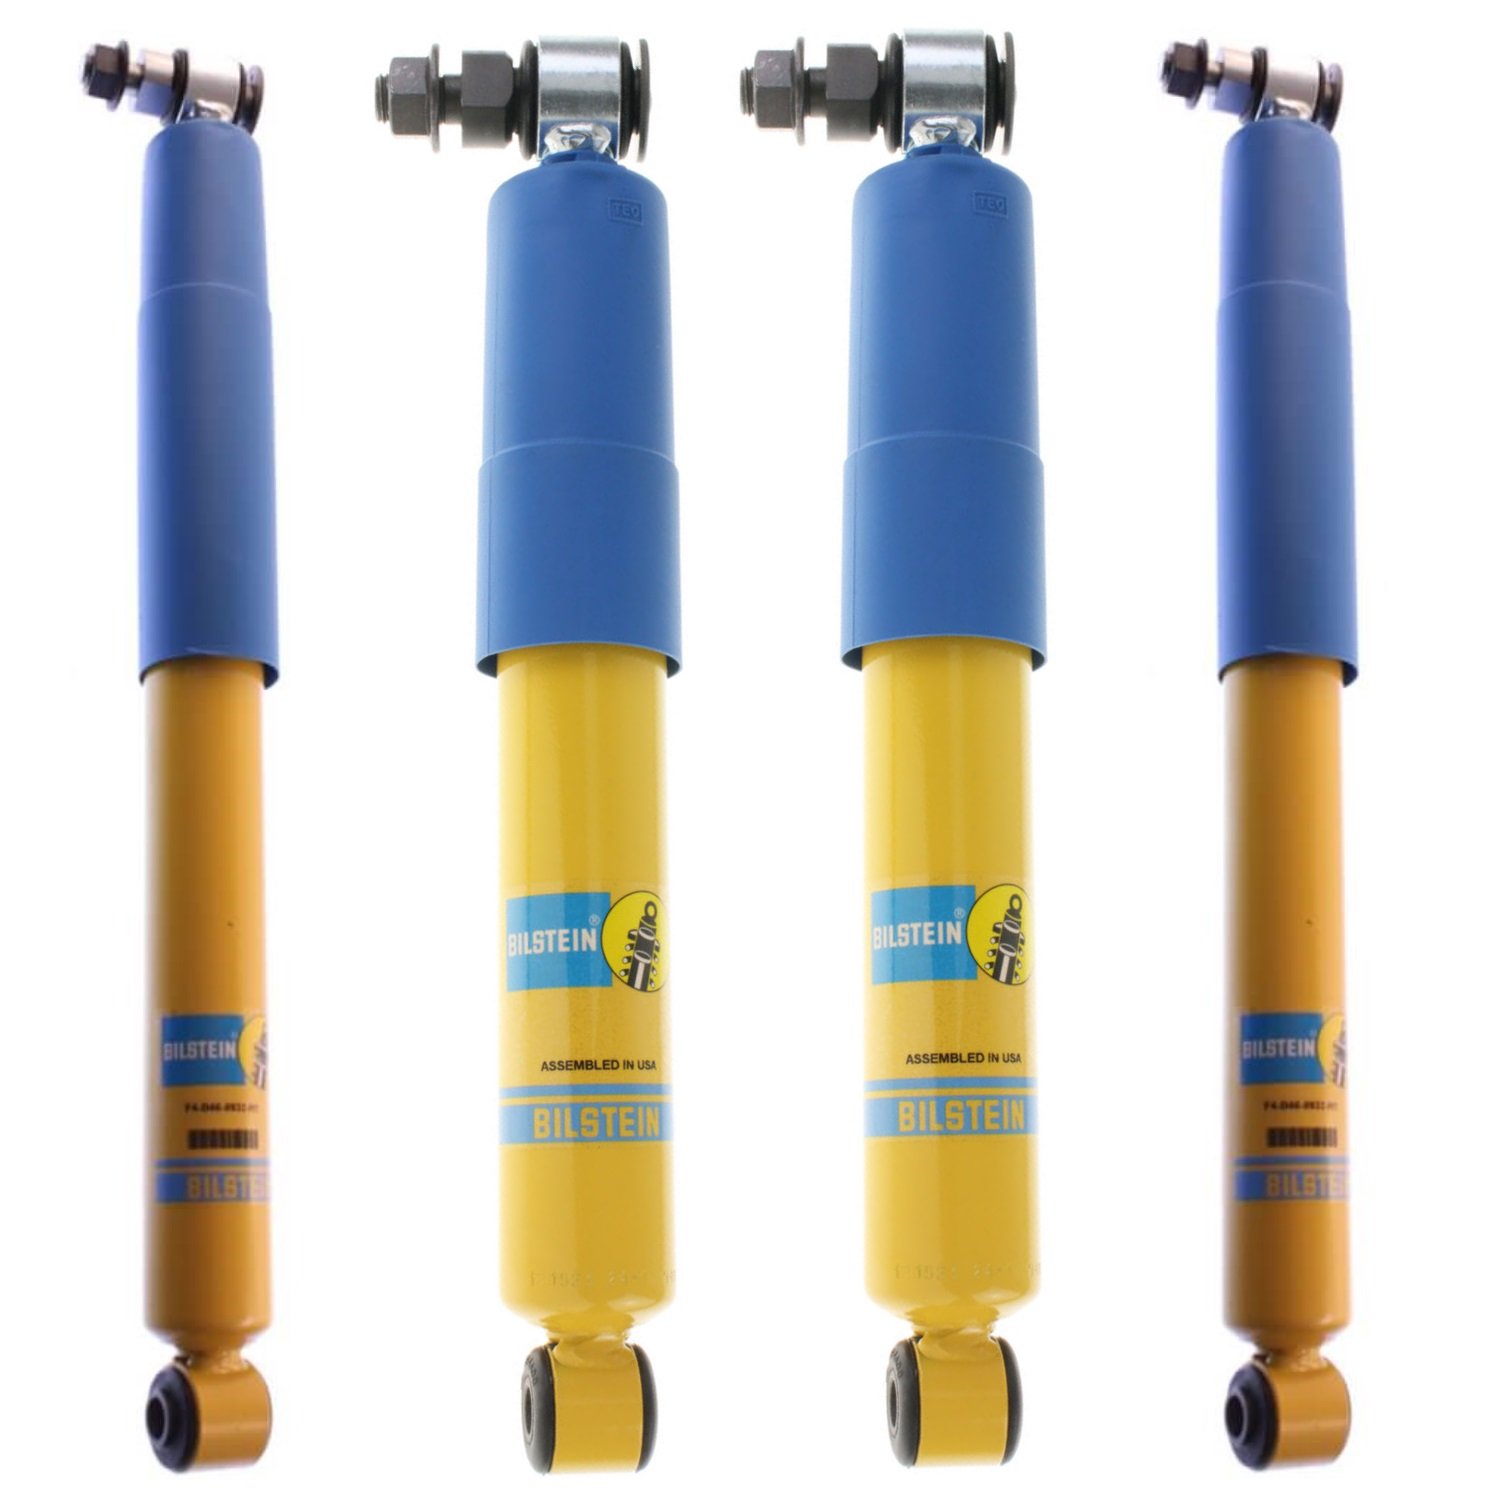 The Best Aftermarket Suspension Parts For Your Truck Bilstein B6 4600 Kit 2 Front Shocks For 1975-1986 Chevy C20 Suburban Ride Monotube Gas Charged Series Replacement Shock Absorbers Car Or Suv! 